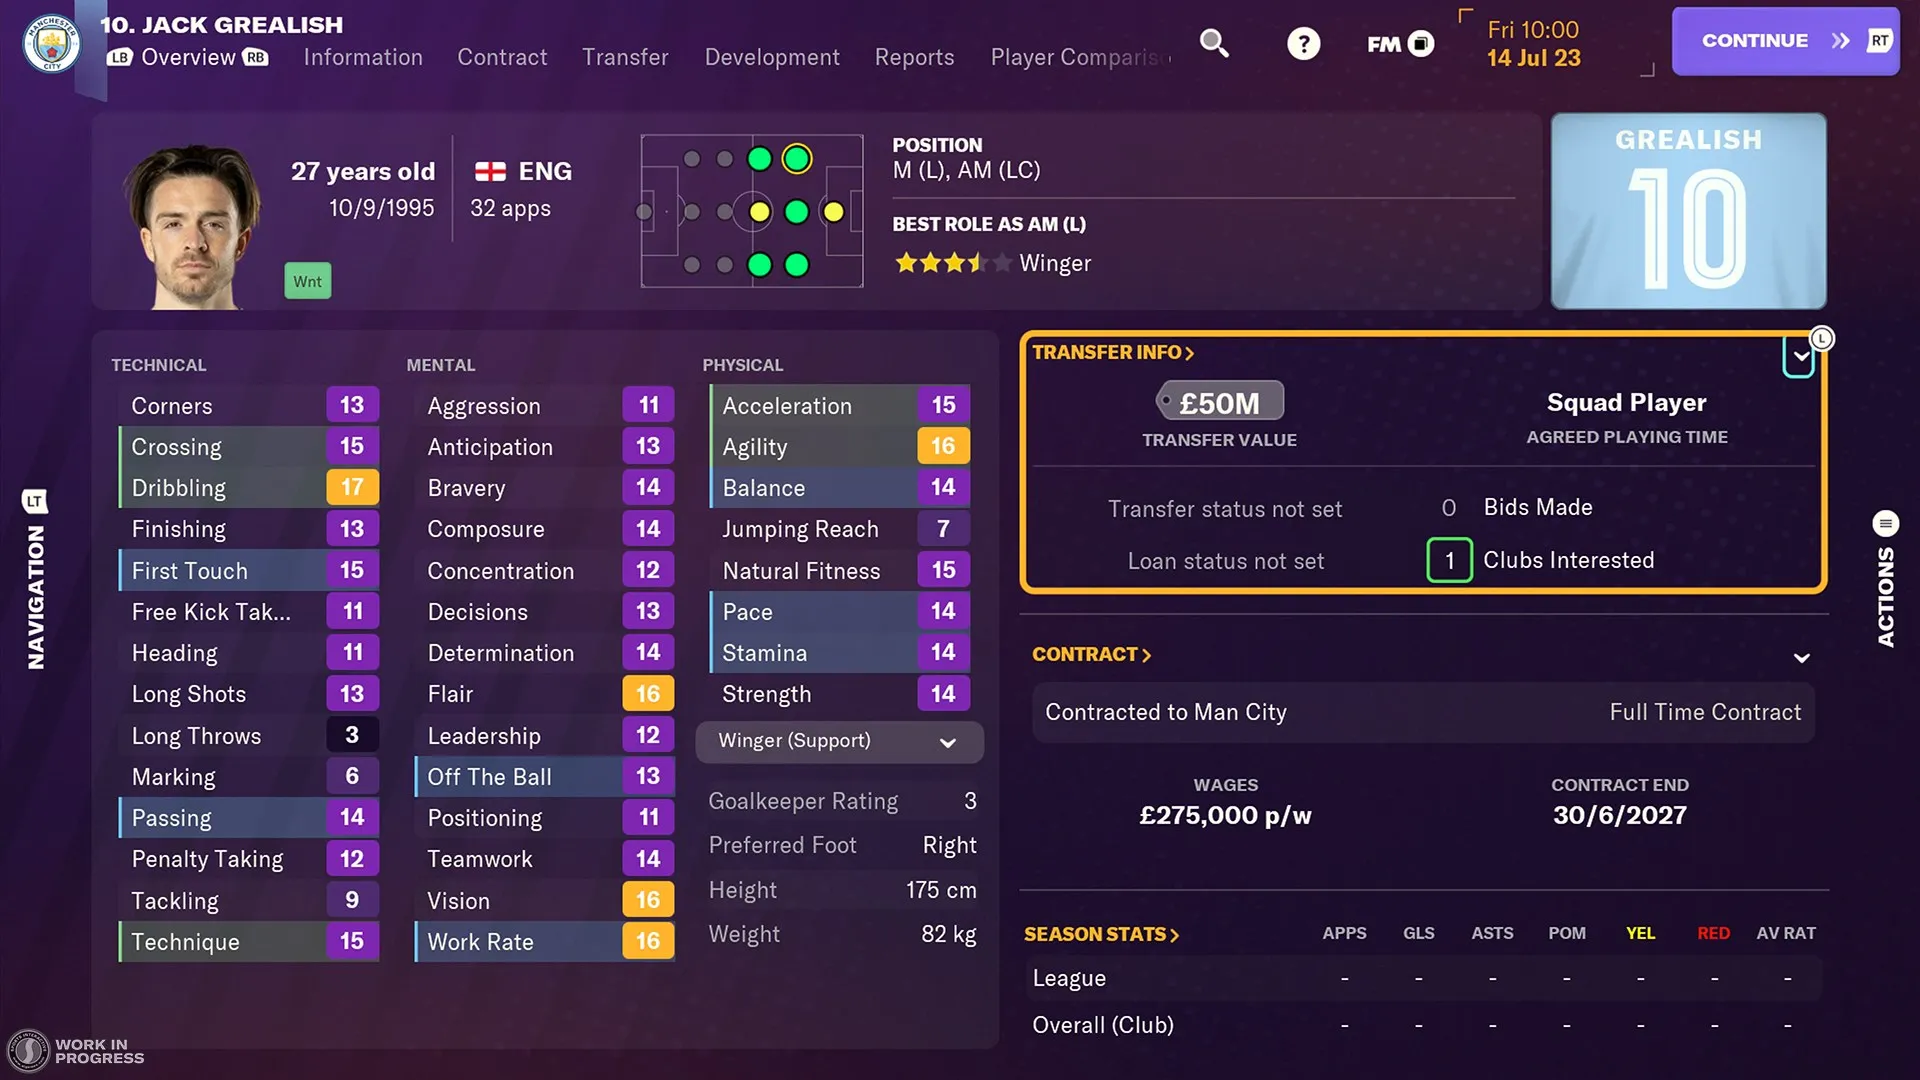 How to play Football Manager 2024 through Netflix